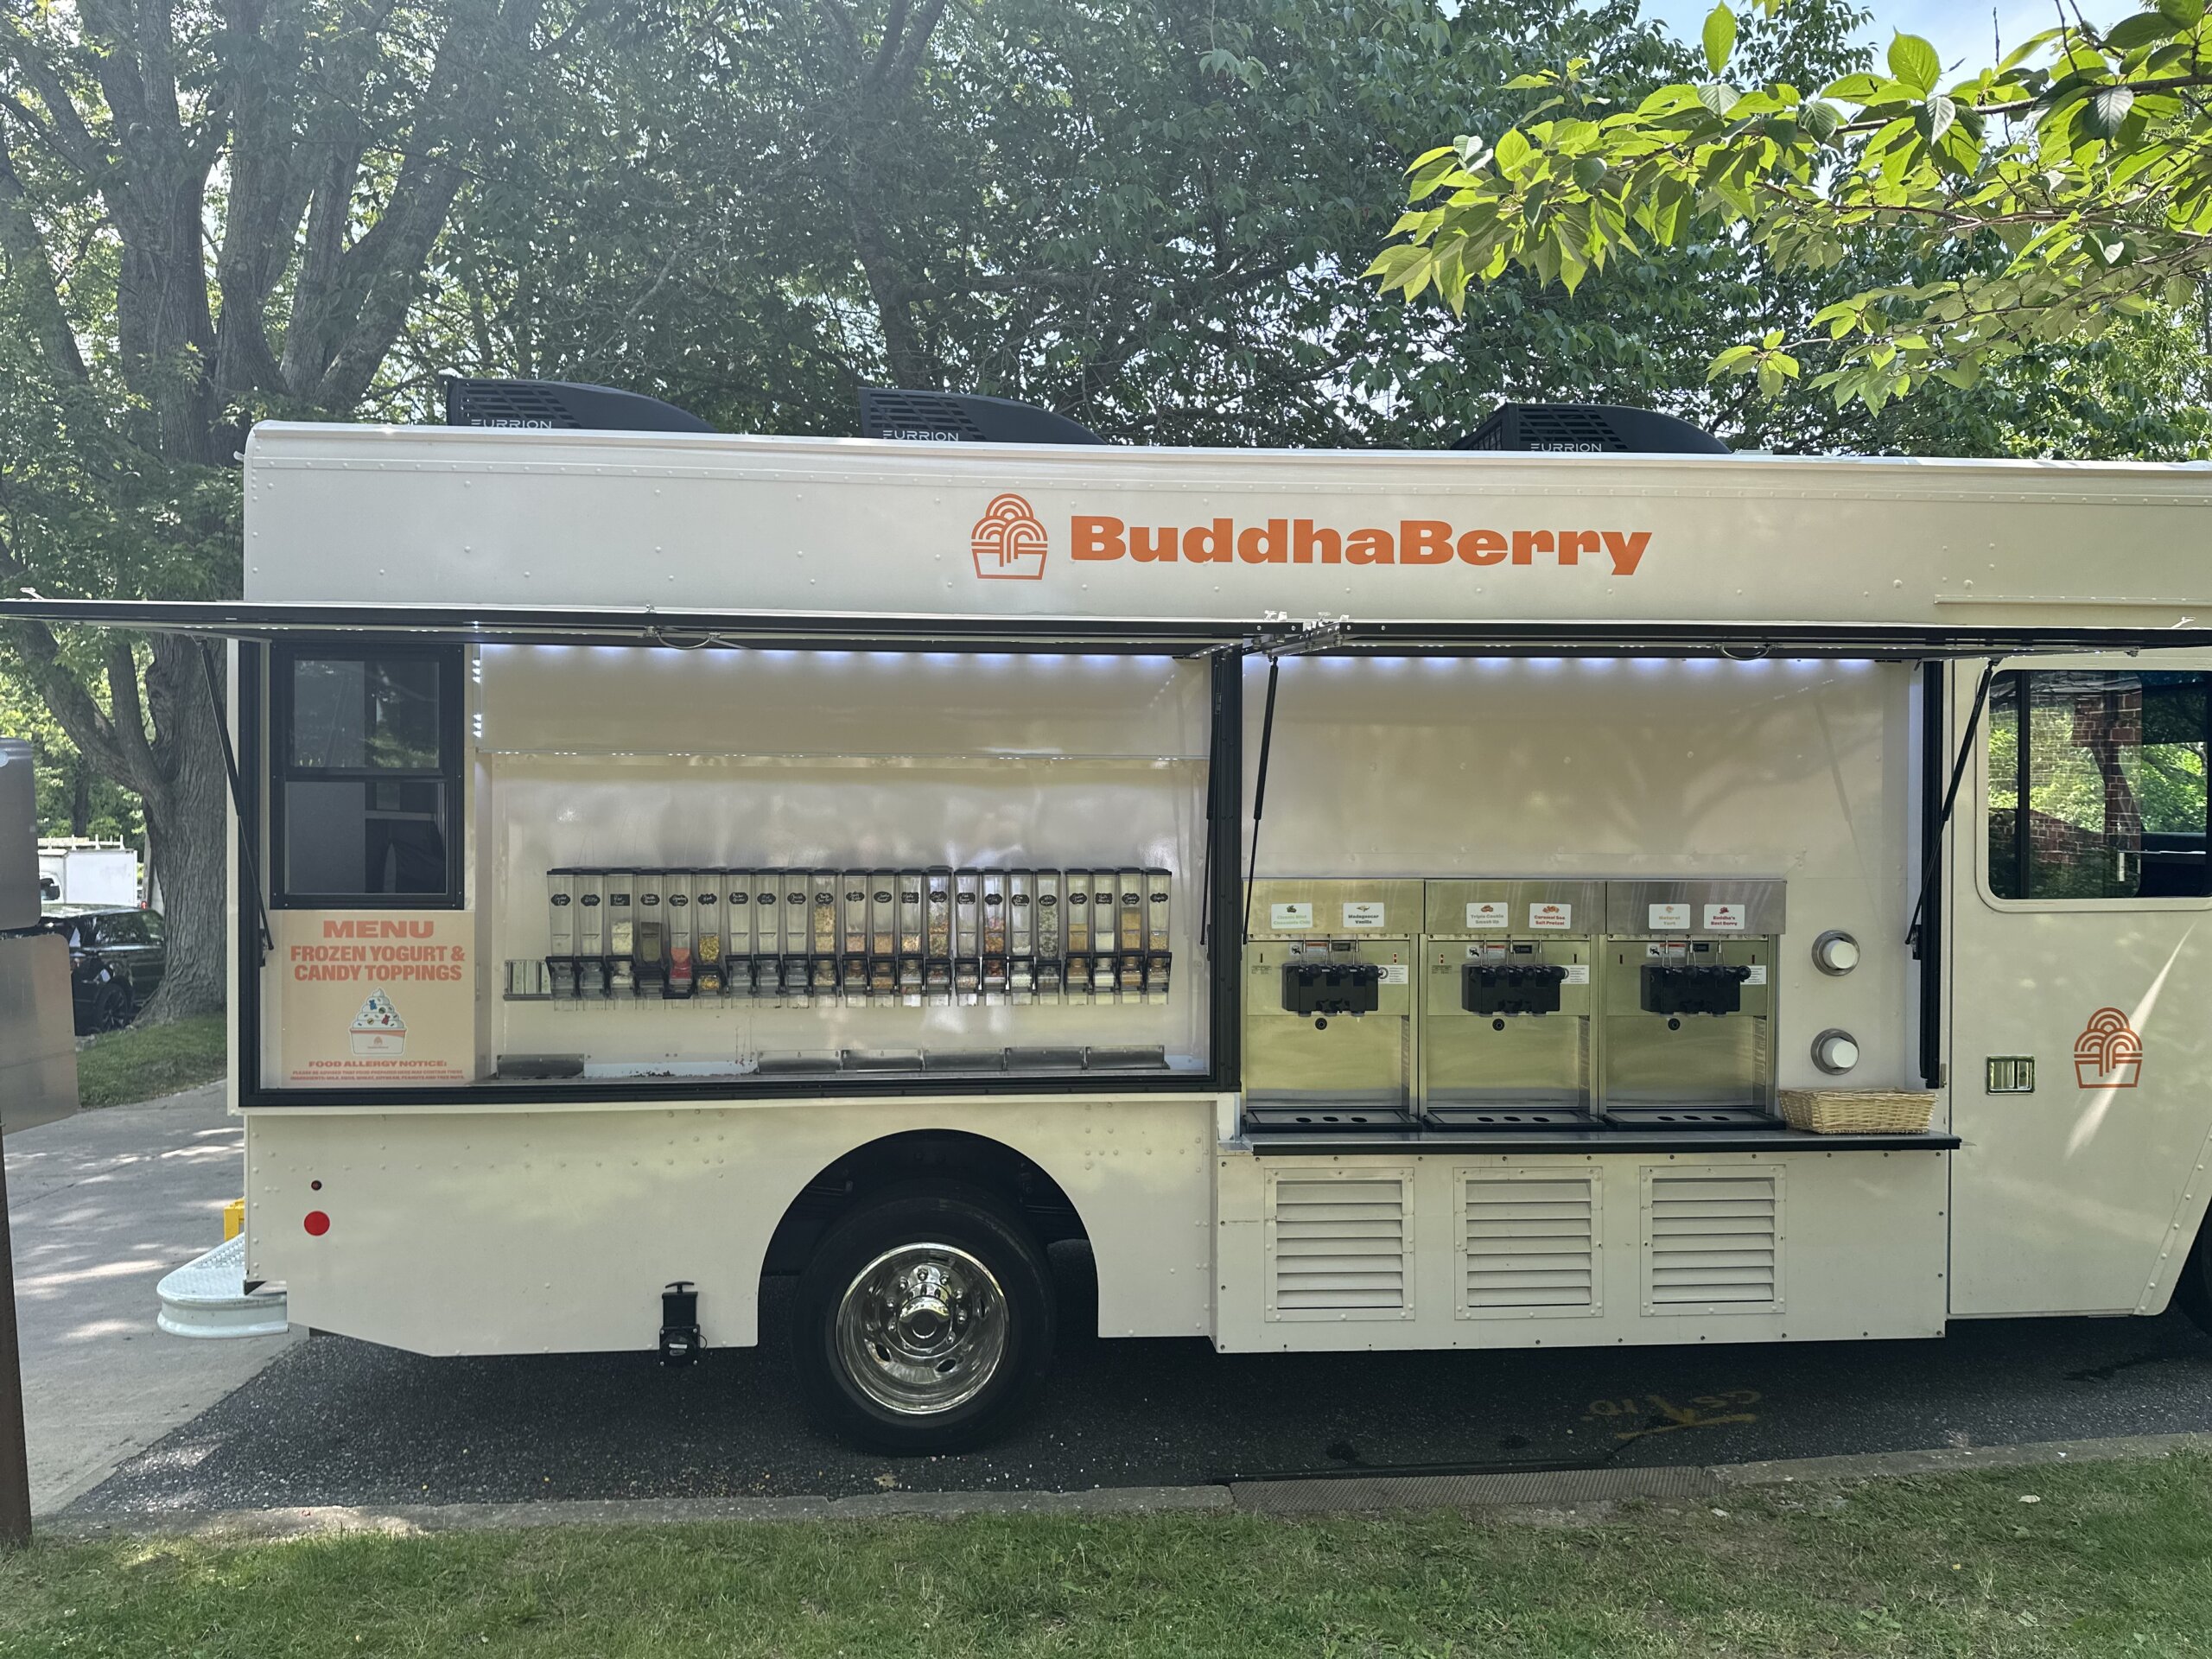 BuddhaBerry on wheels is coming to GrillHampton 2023